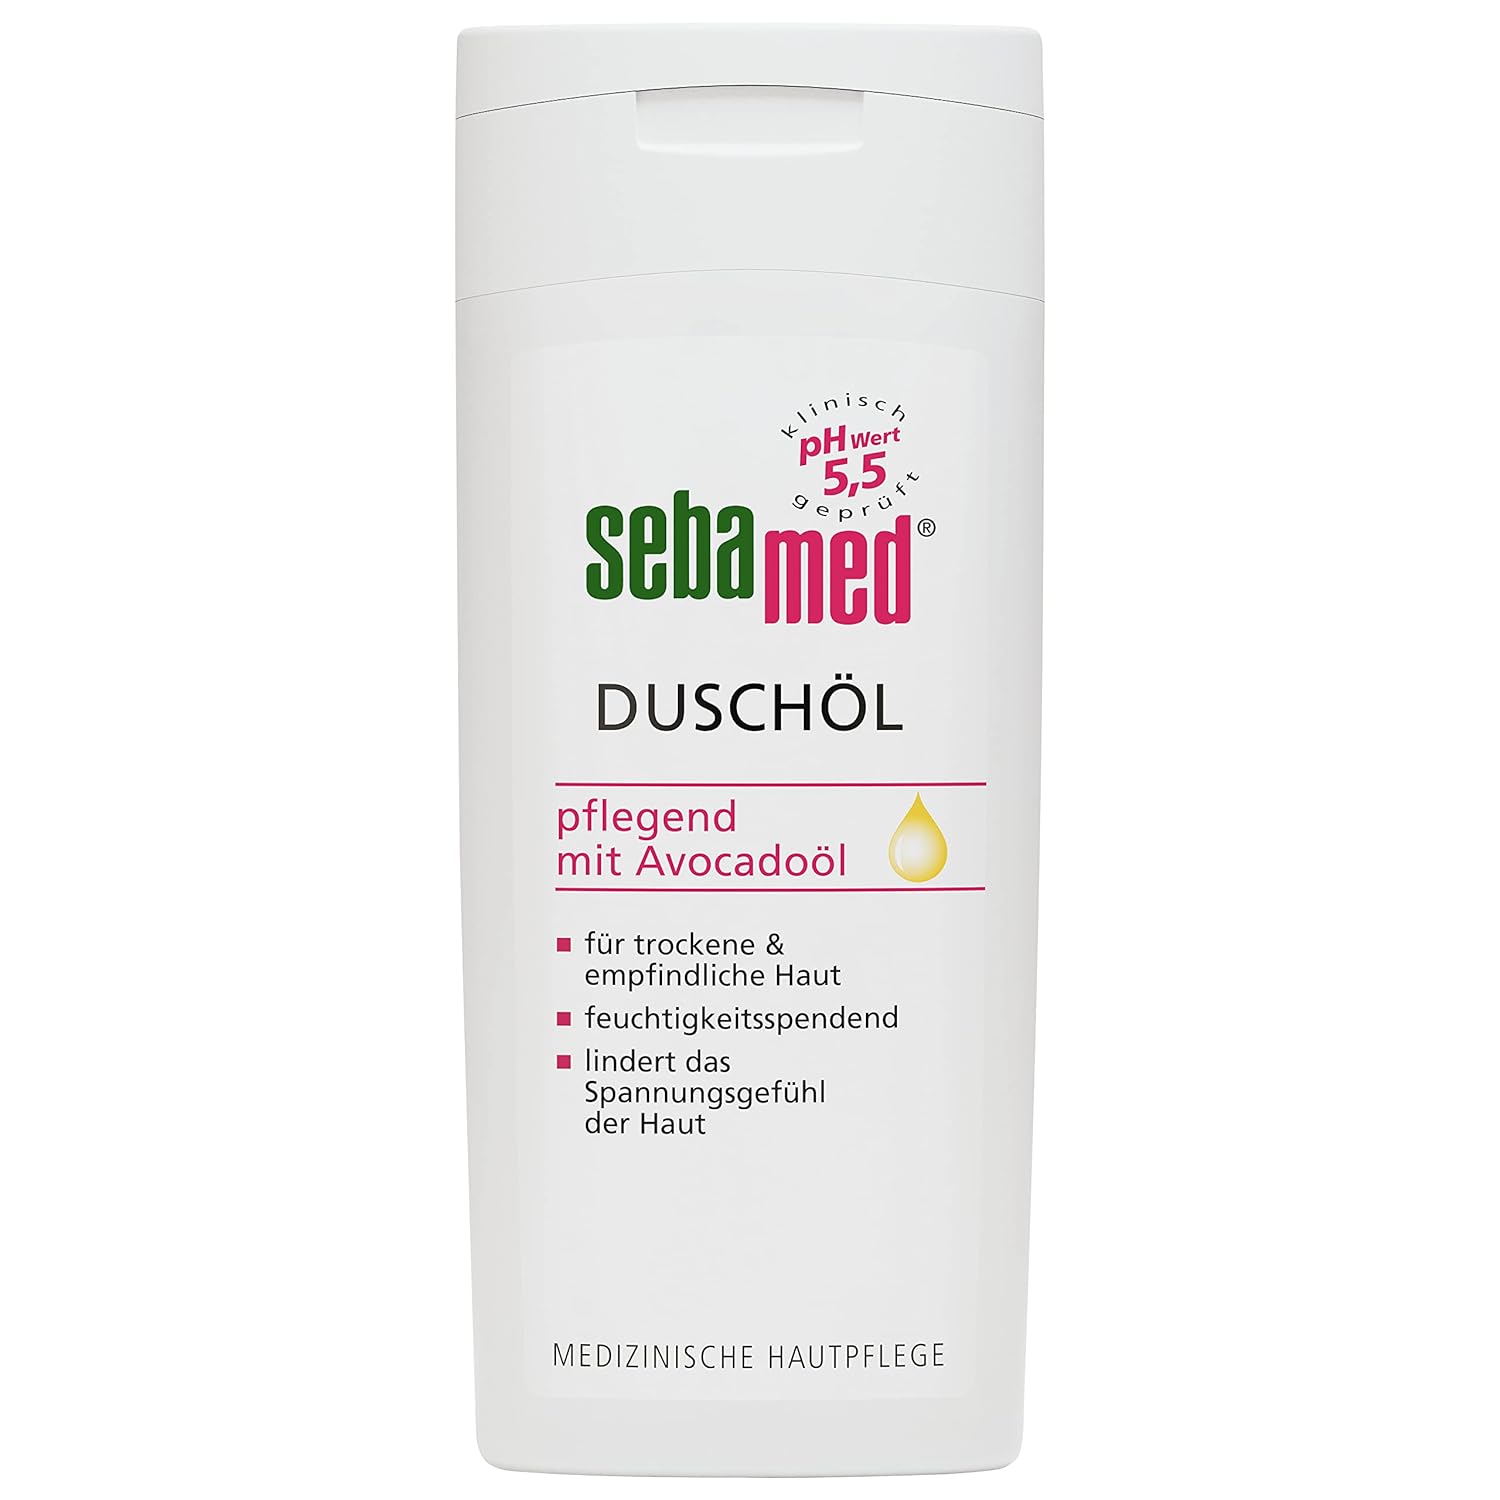 Sebamed Shower Oil, for Gentle and Especially Nourishing Cleansing of Sensitive and Dry Skin, with Over 50% Oil Content*, 200 ml